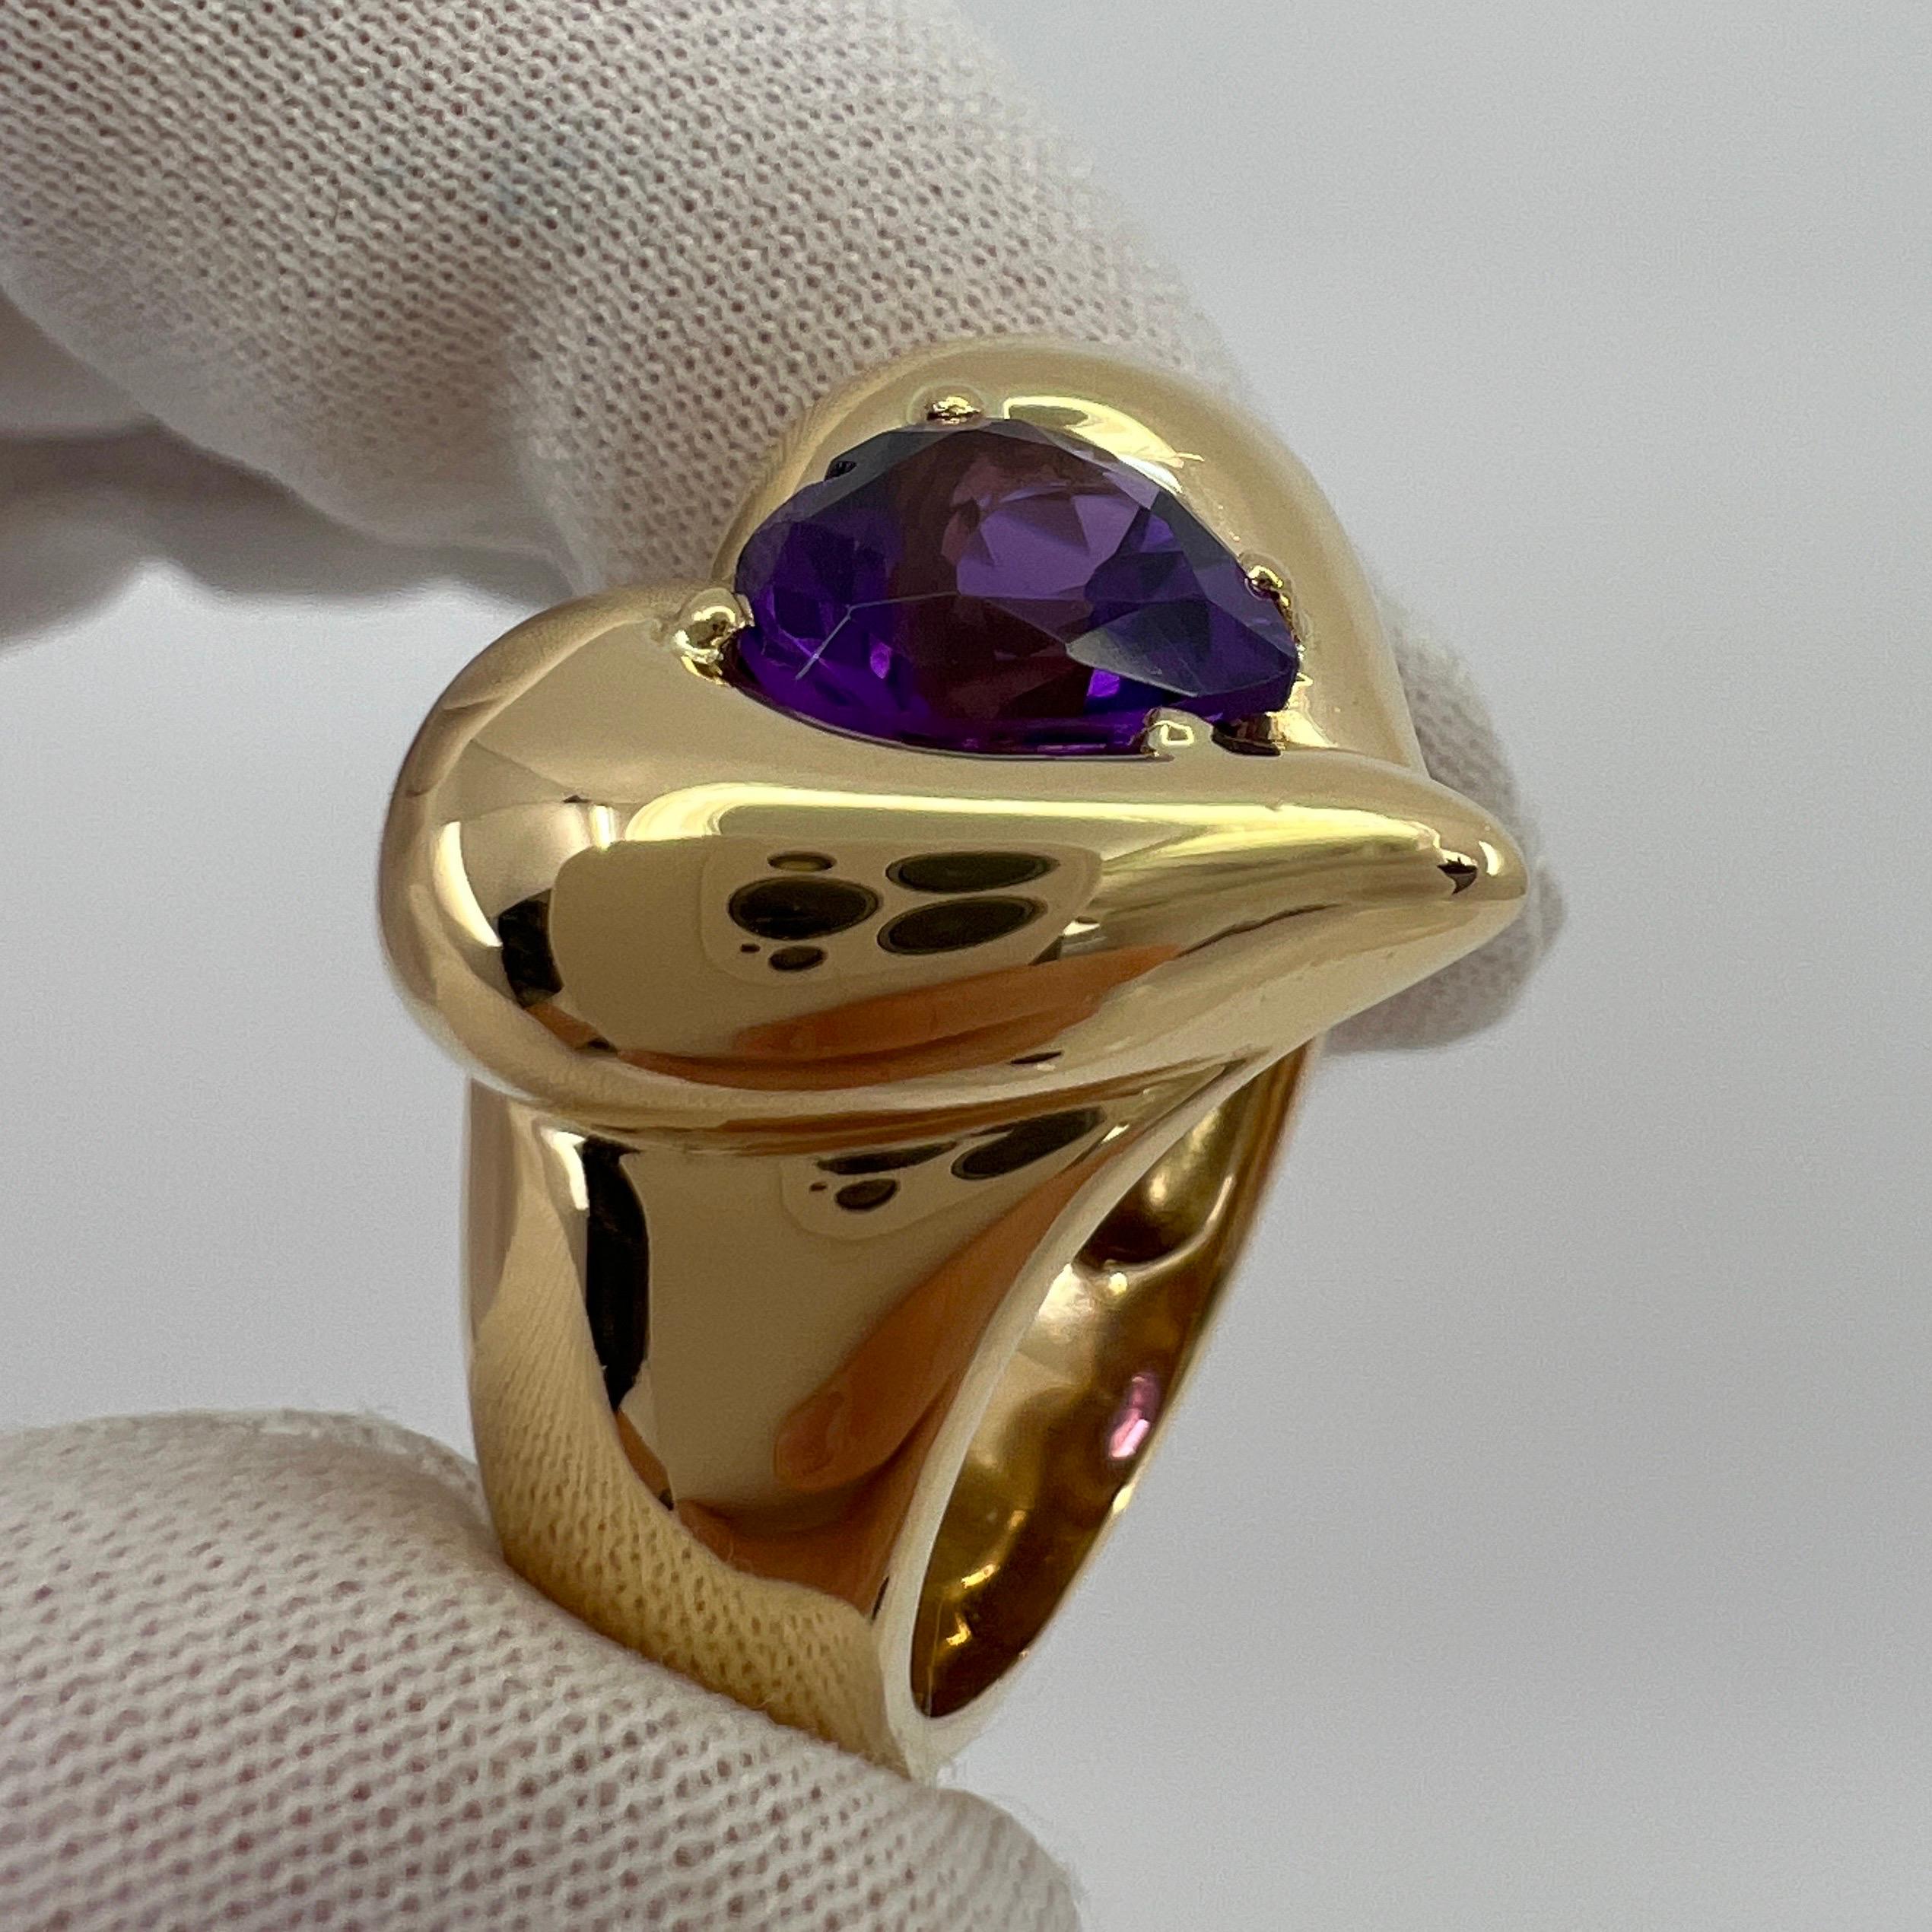 Rare Vintage Van Cleef & Arpels 18k Yellow Gold Amethyst Heart Ring with Box 5